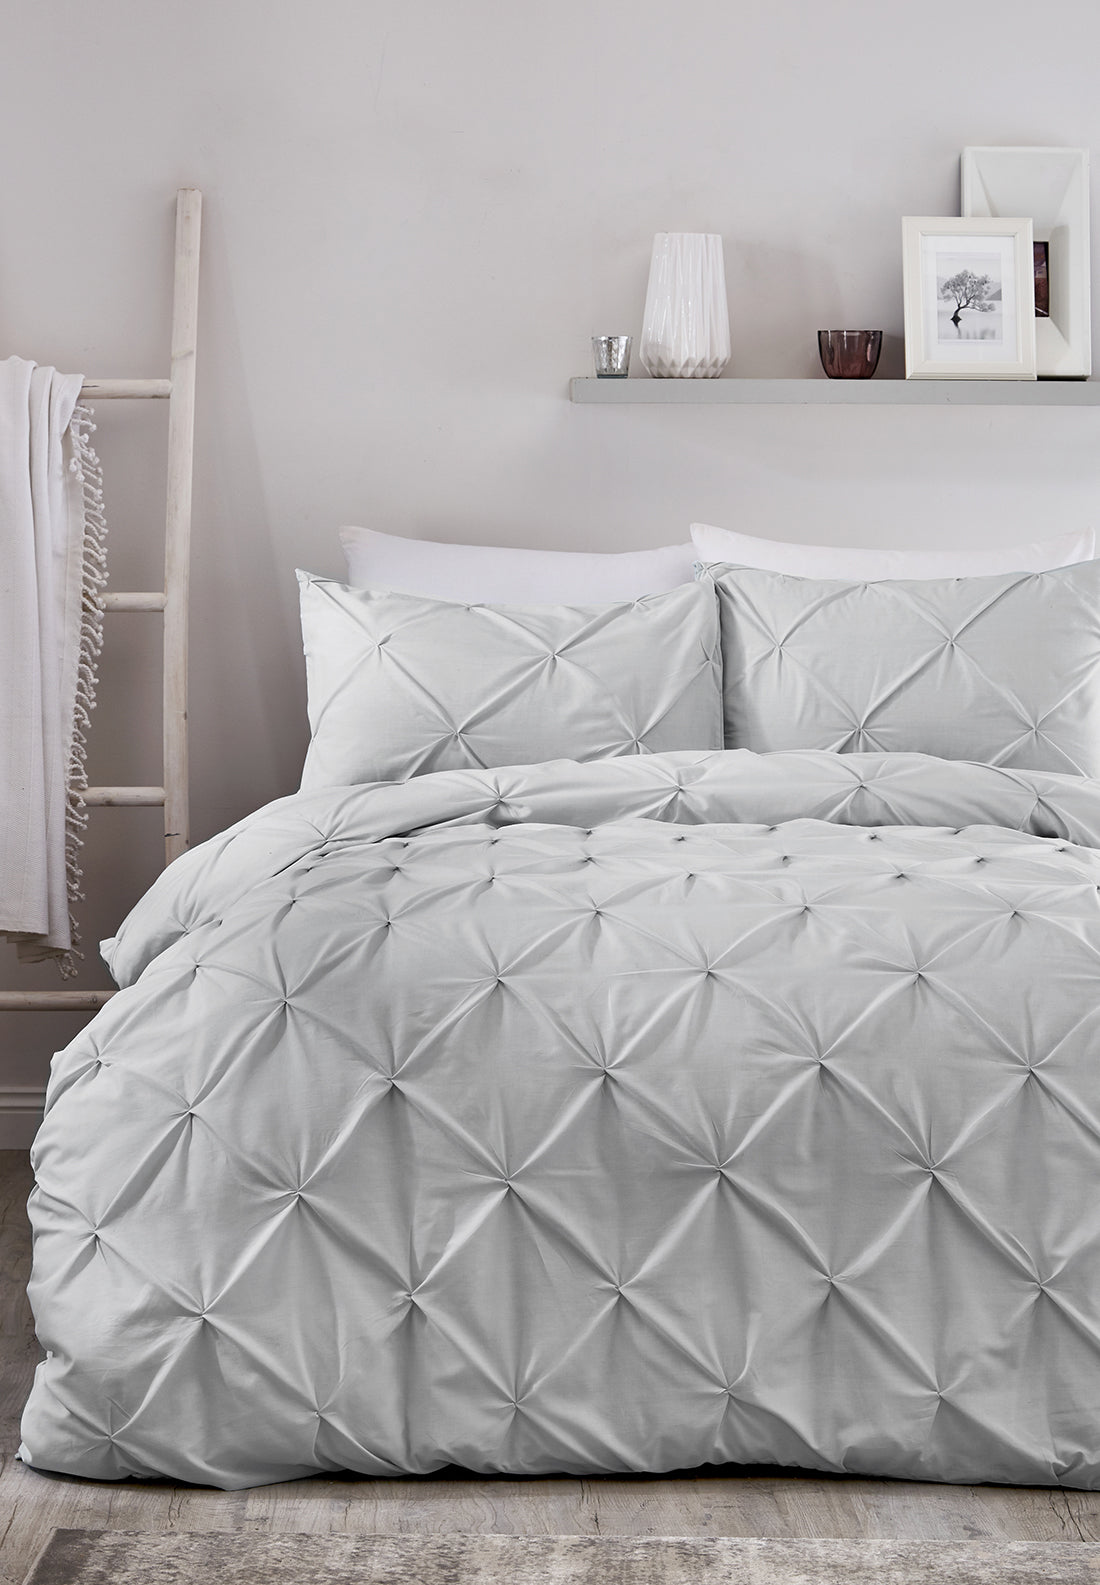 The Home Luxury Collection Lorna Duvet Cover Set - Silver 1 Shaws Department Stores